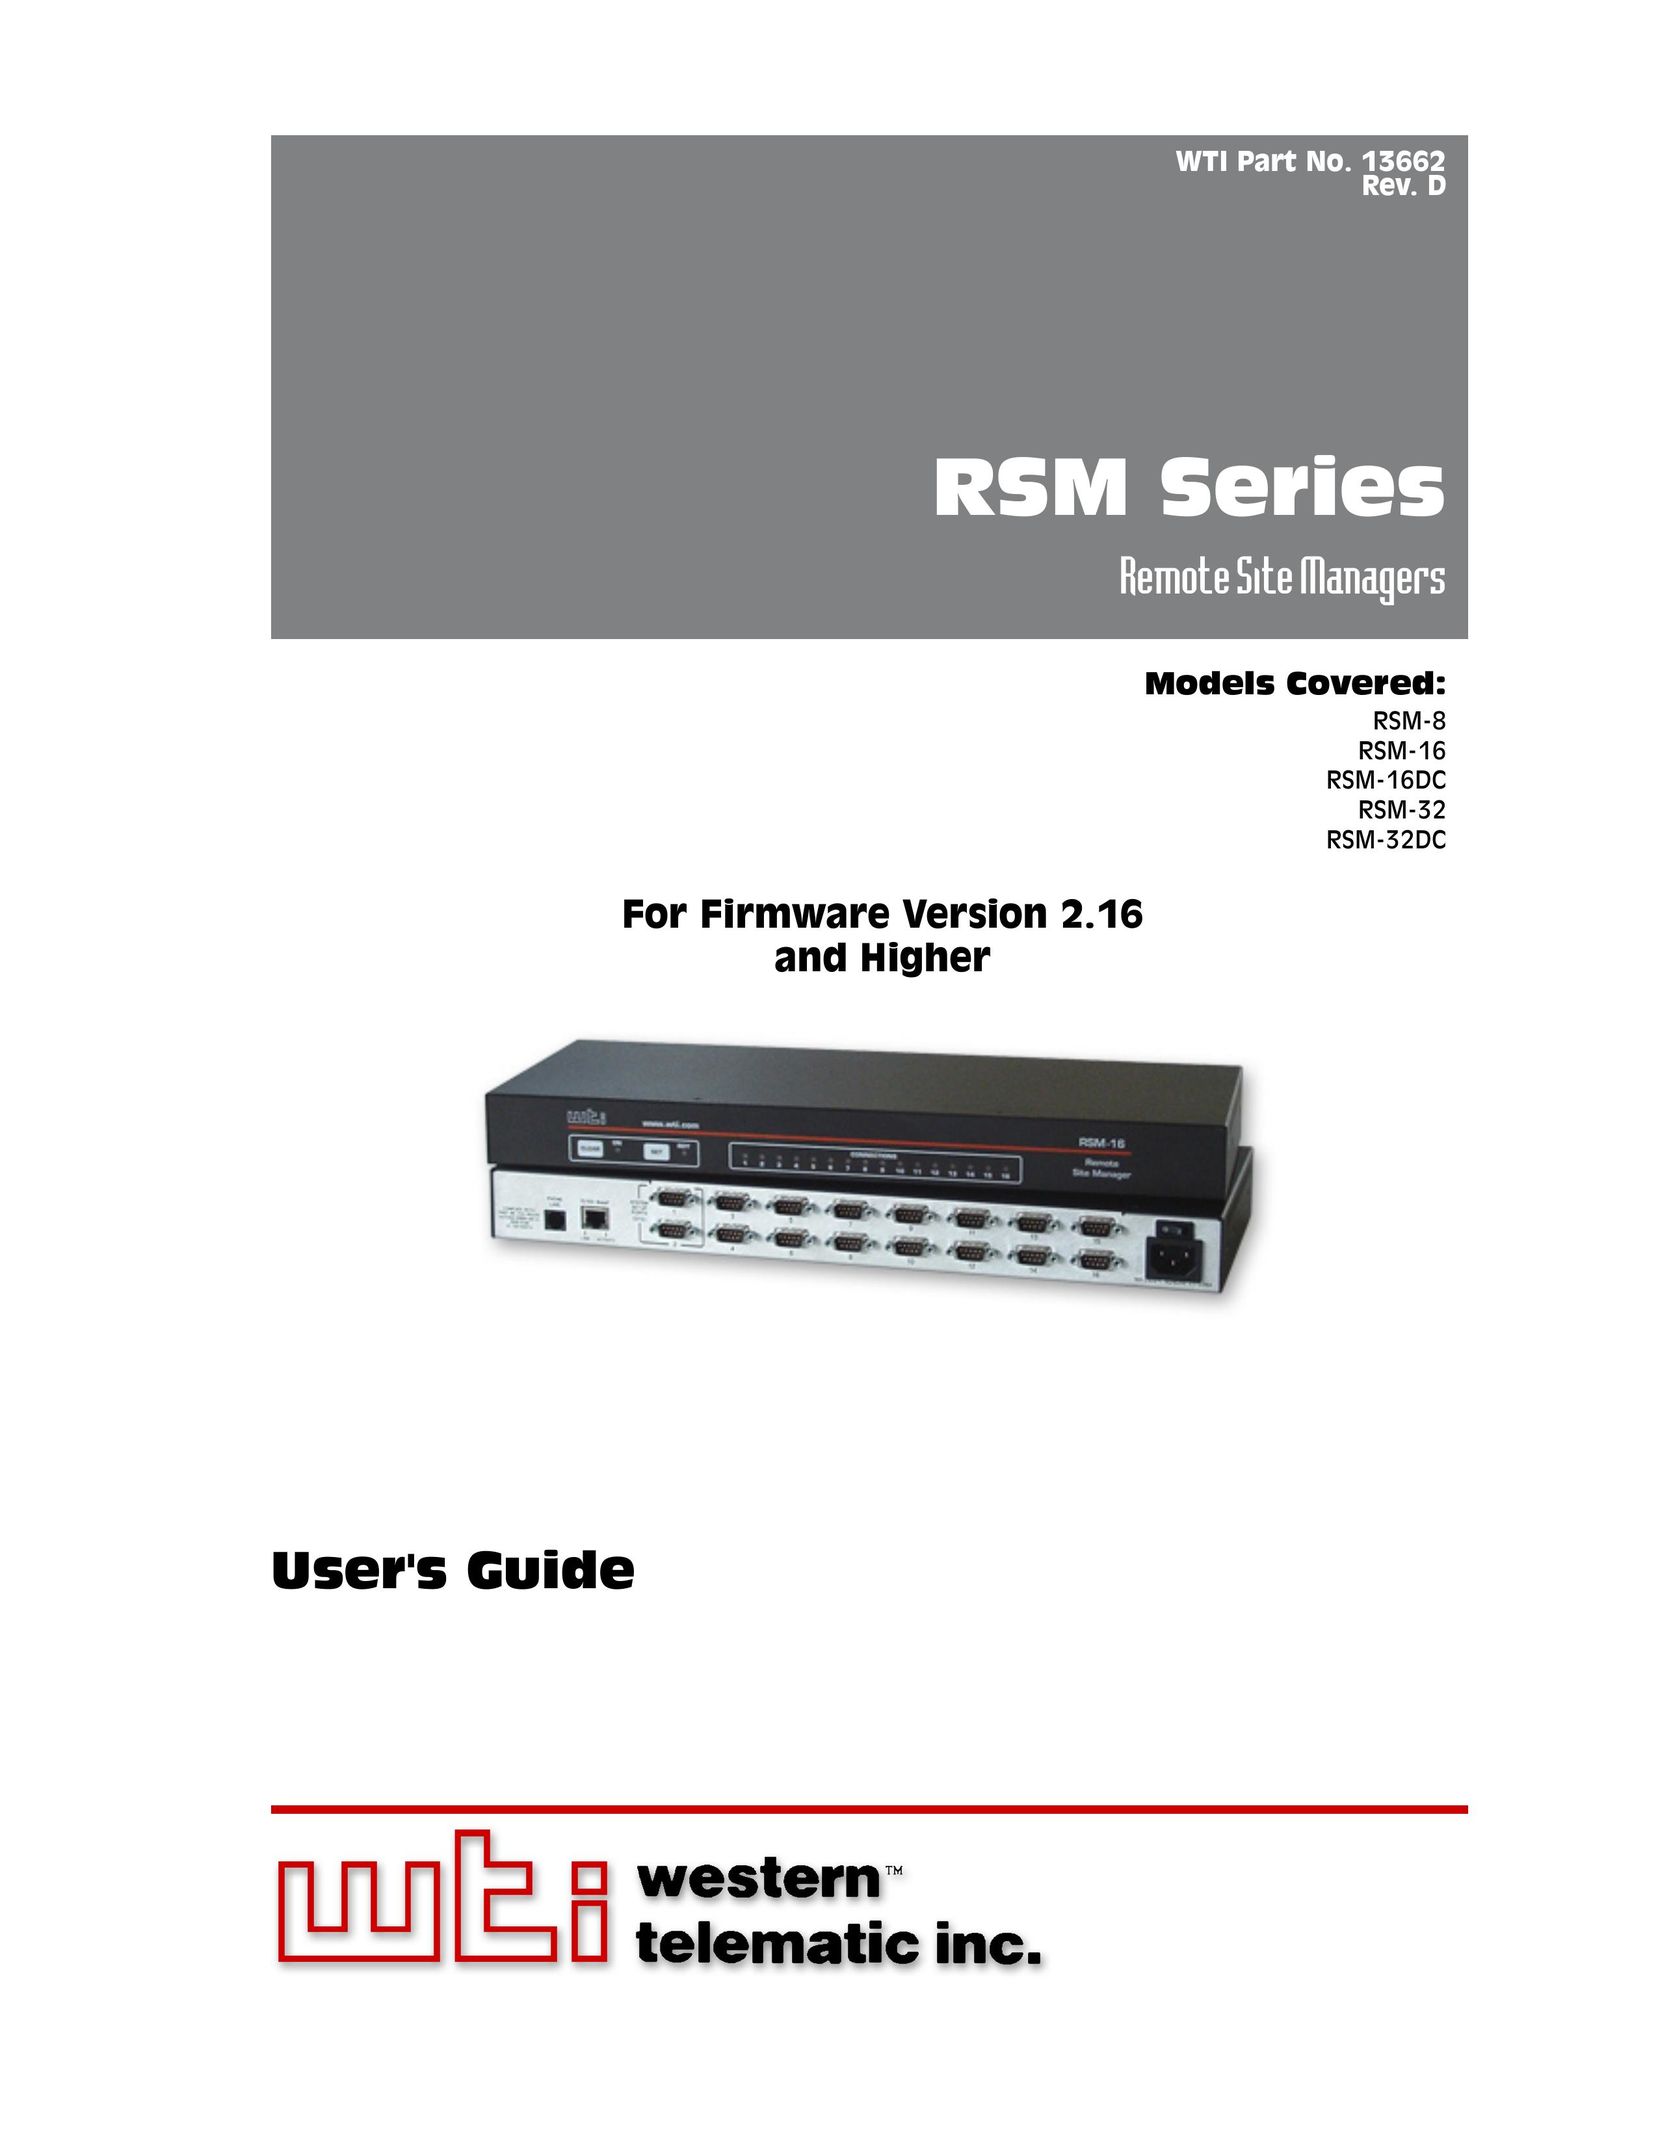 Western Telematic RSM-32DC Video Gaming Accessories User Manual (Page 1)